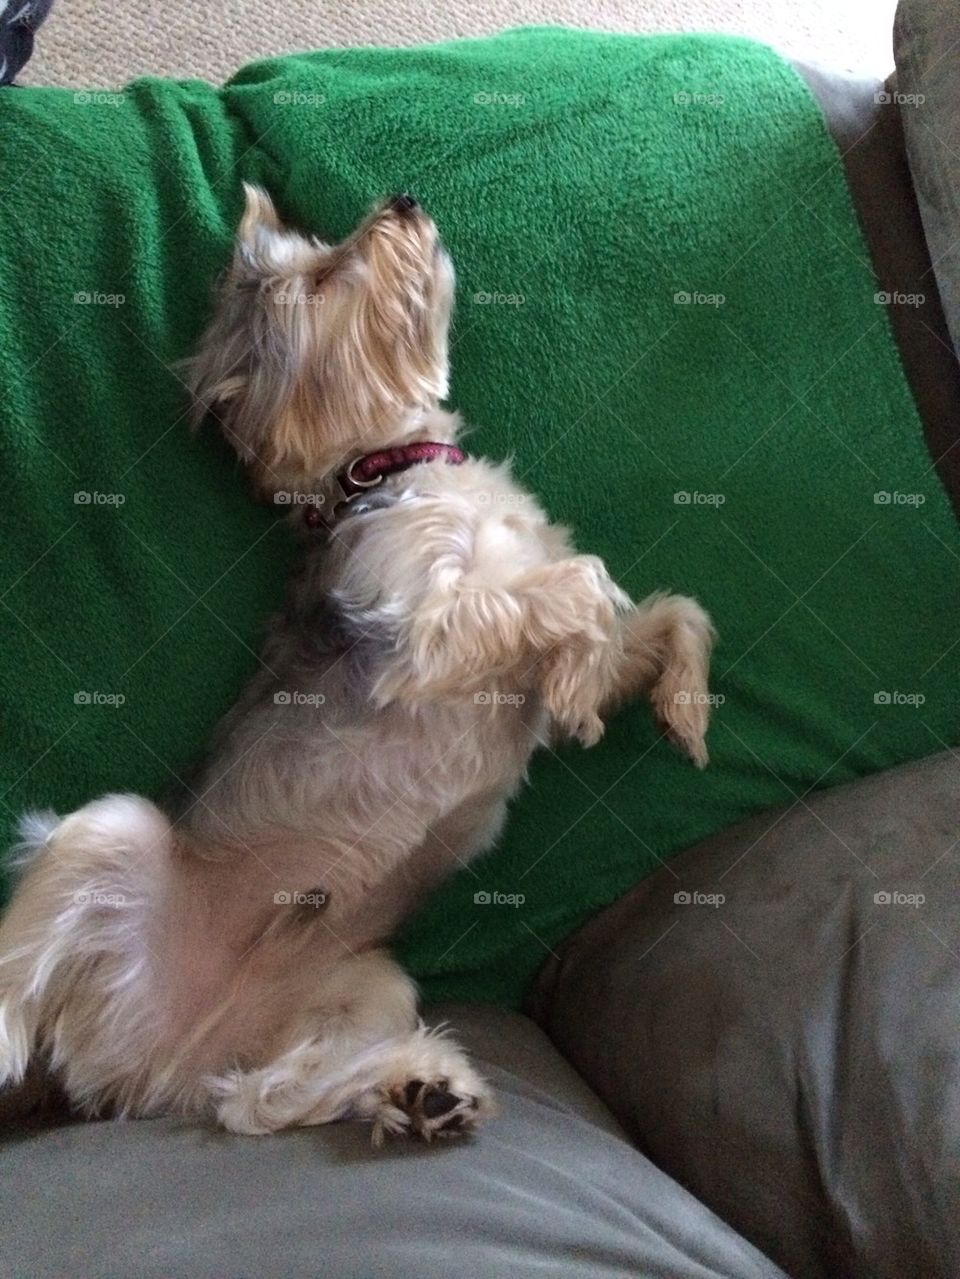 Completely relaxed Yorkie. This is our crazy dog and funny ways that he lays around. 